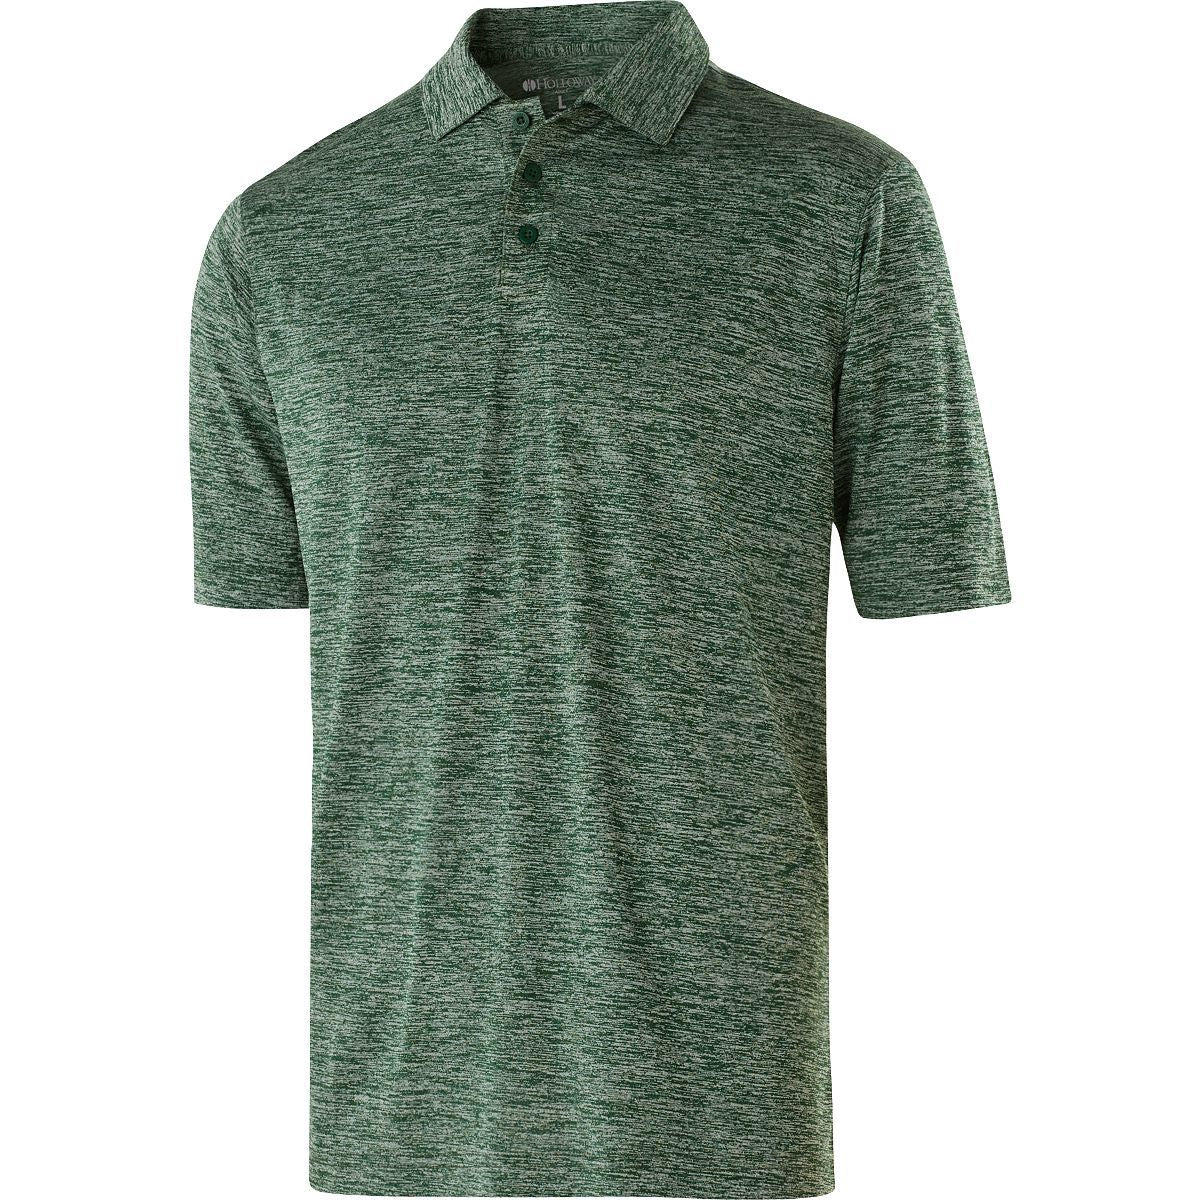 Holloway Electrify 2.0 Polo in Forest Heather  -Part of the Adult, Adult-Polos, Polos, Holloway, Shirts product lines at KanaleyCreations.com